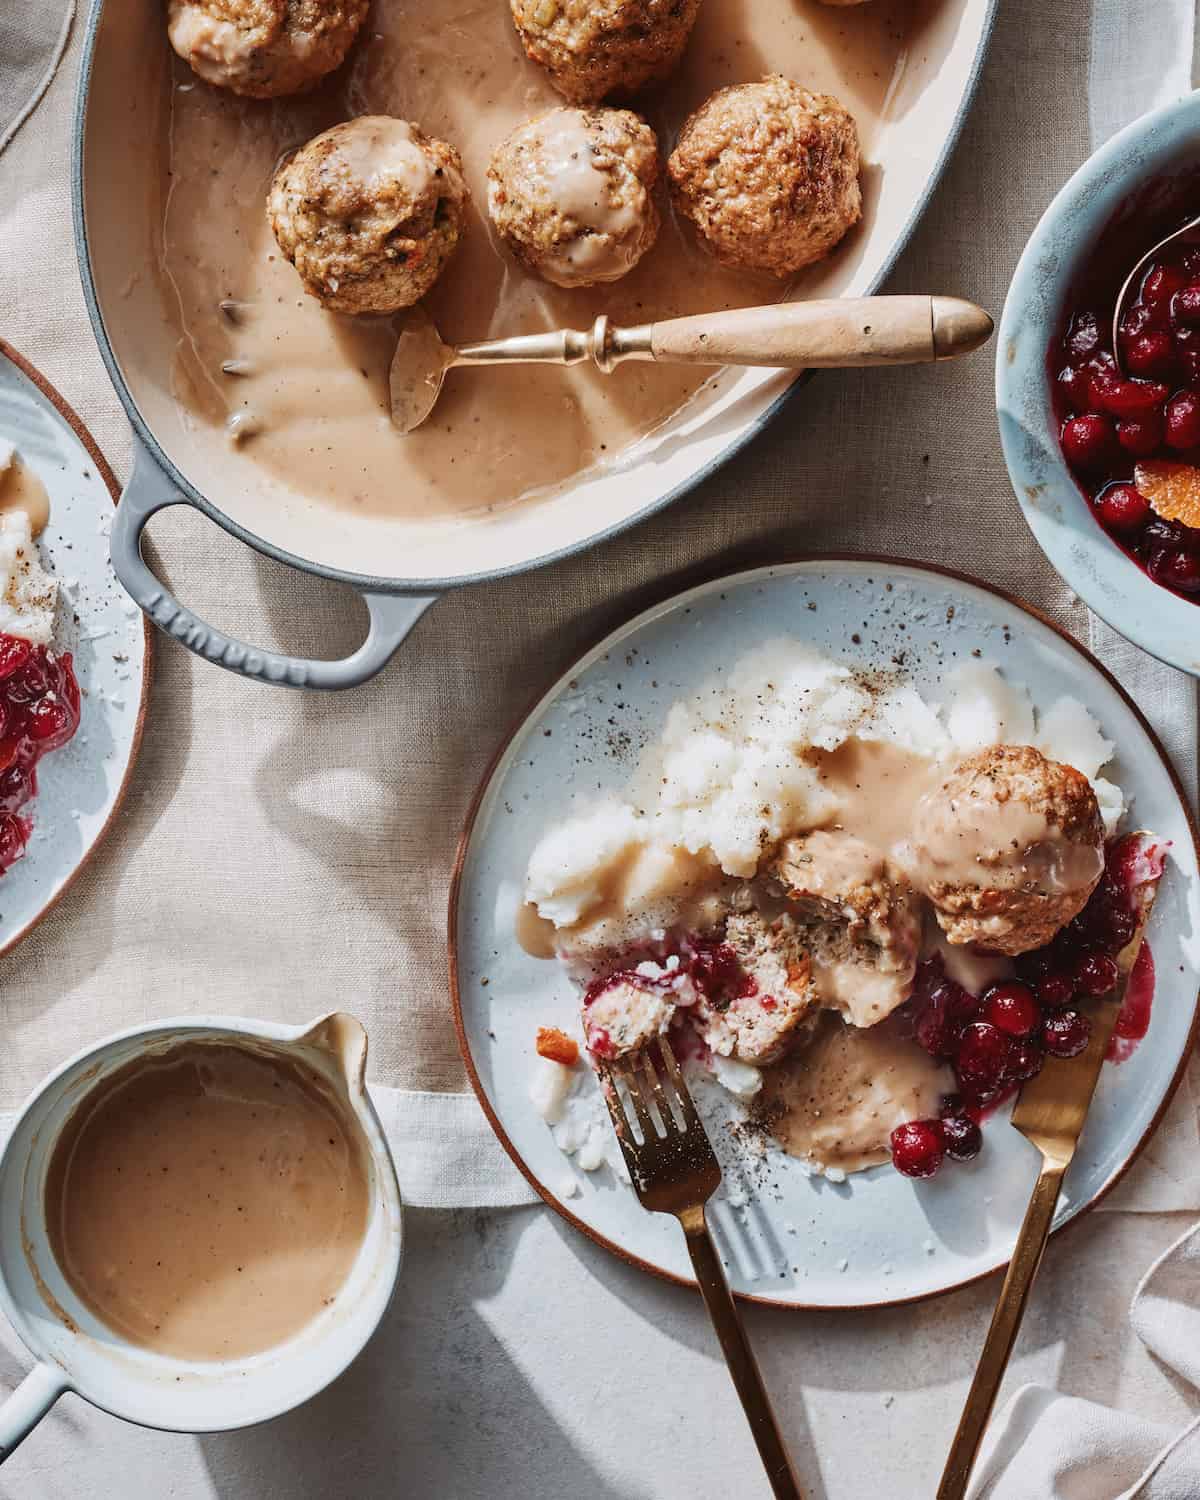 Half view of oval shallow dish with thanksgiving turkey meatballs in gravy with a big serving fork, placed on a table layered with a cloth, a bowl with cranberry sauce peeking from the side, a gravy boat with more gravy and a plate of mashed potato, meatballs and cranberry sauce.